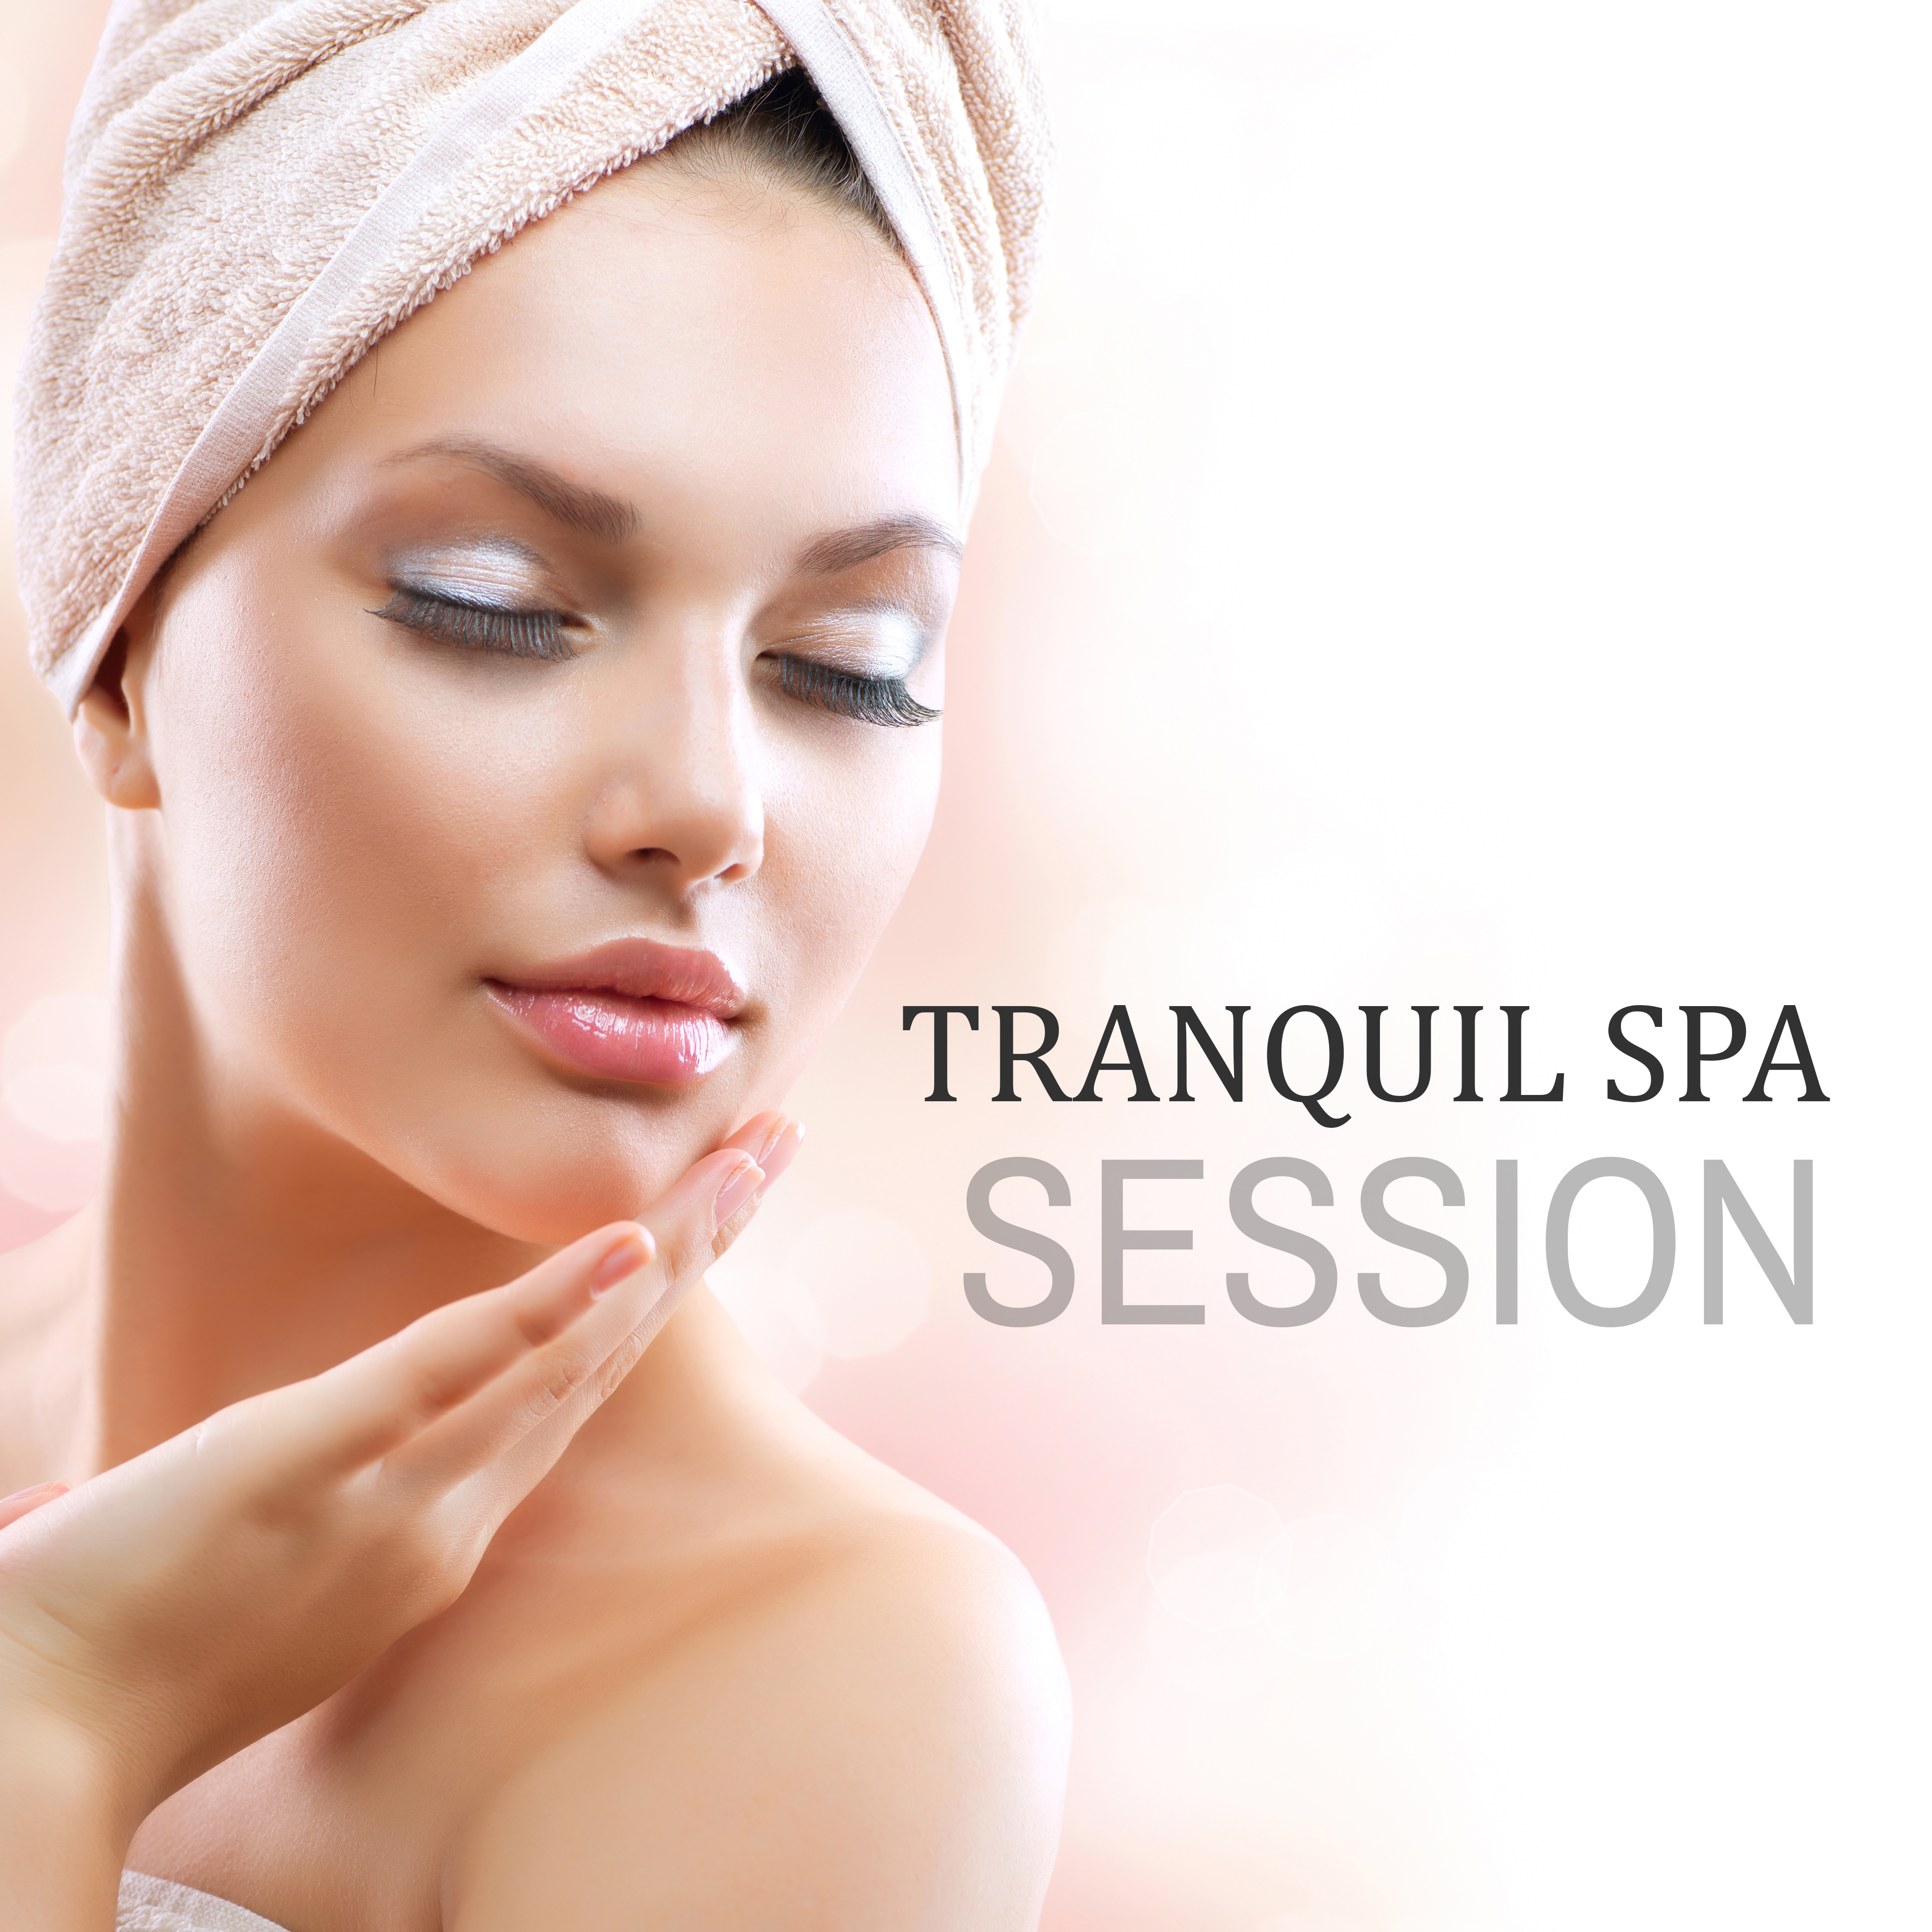 Tranquil Spa Session